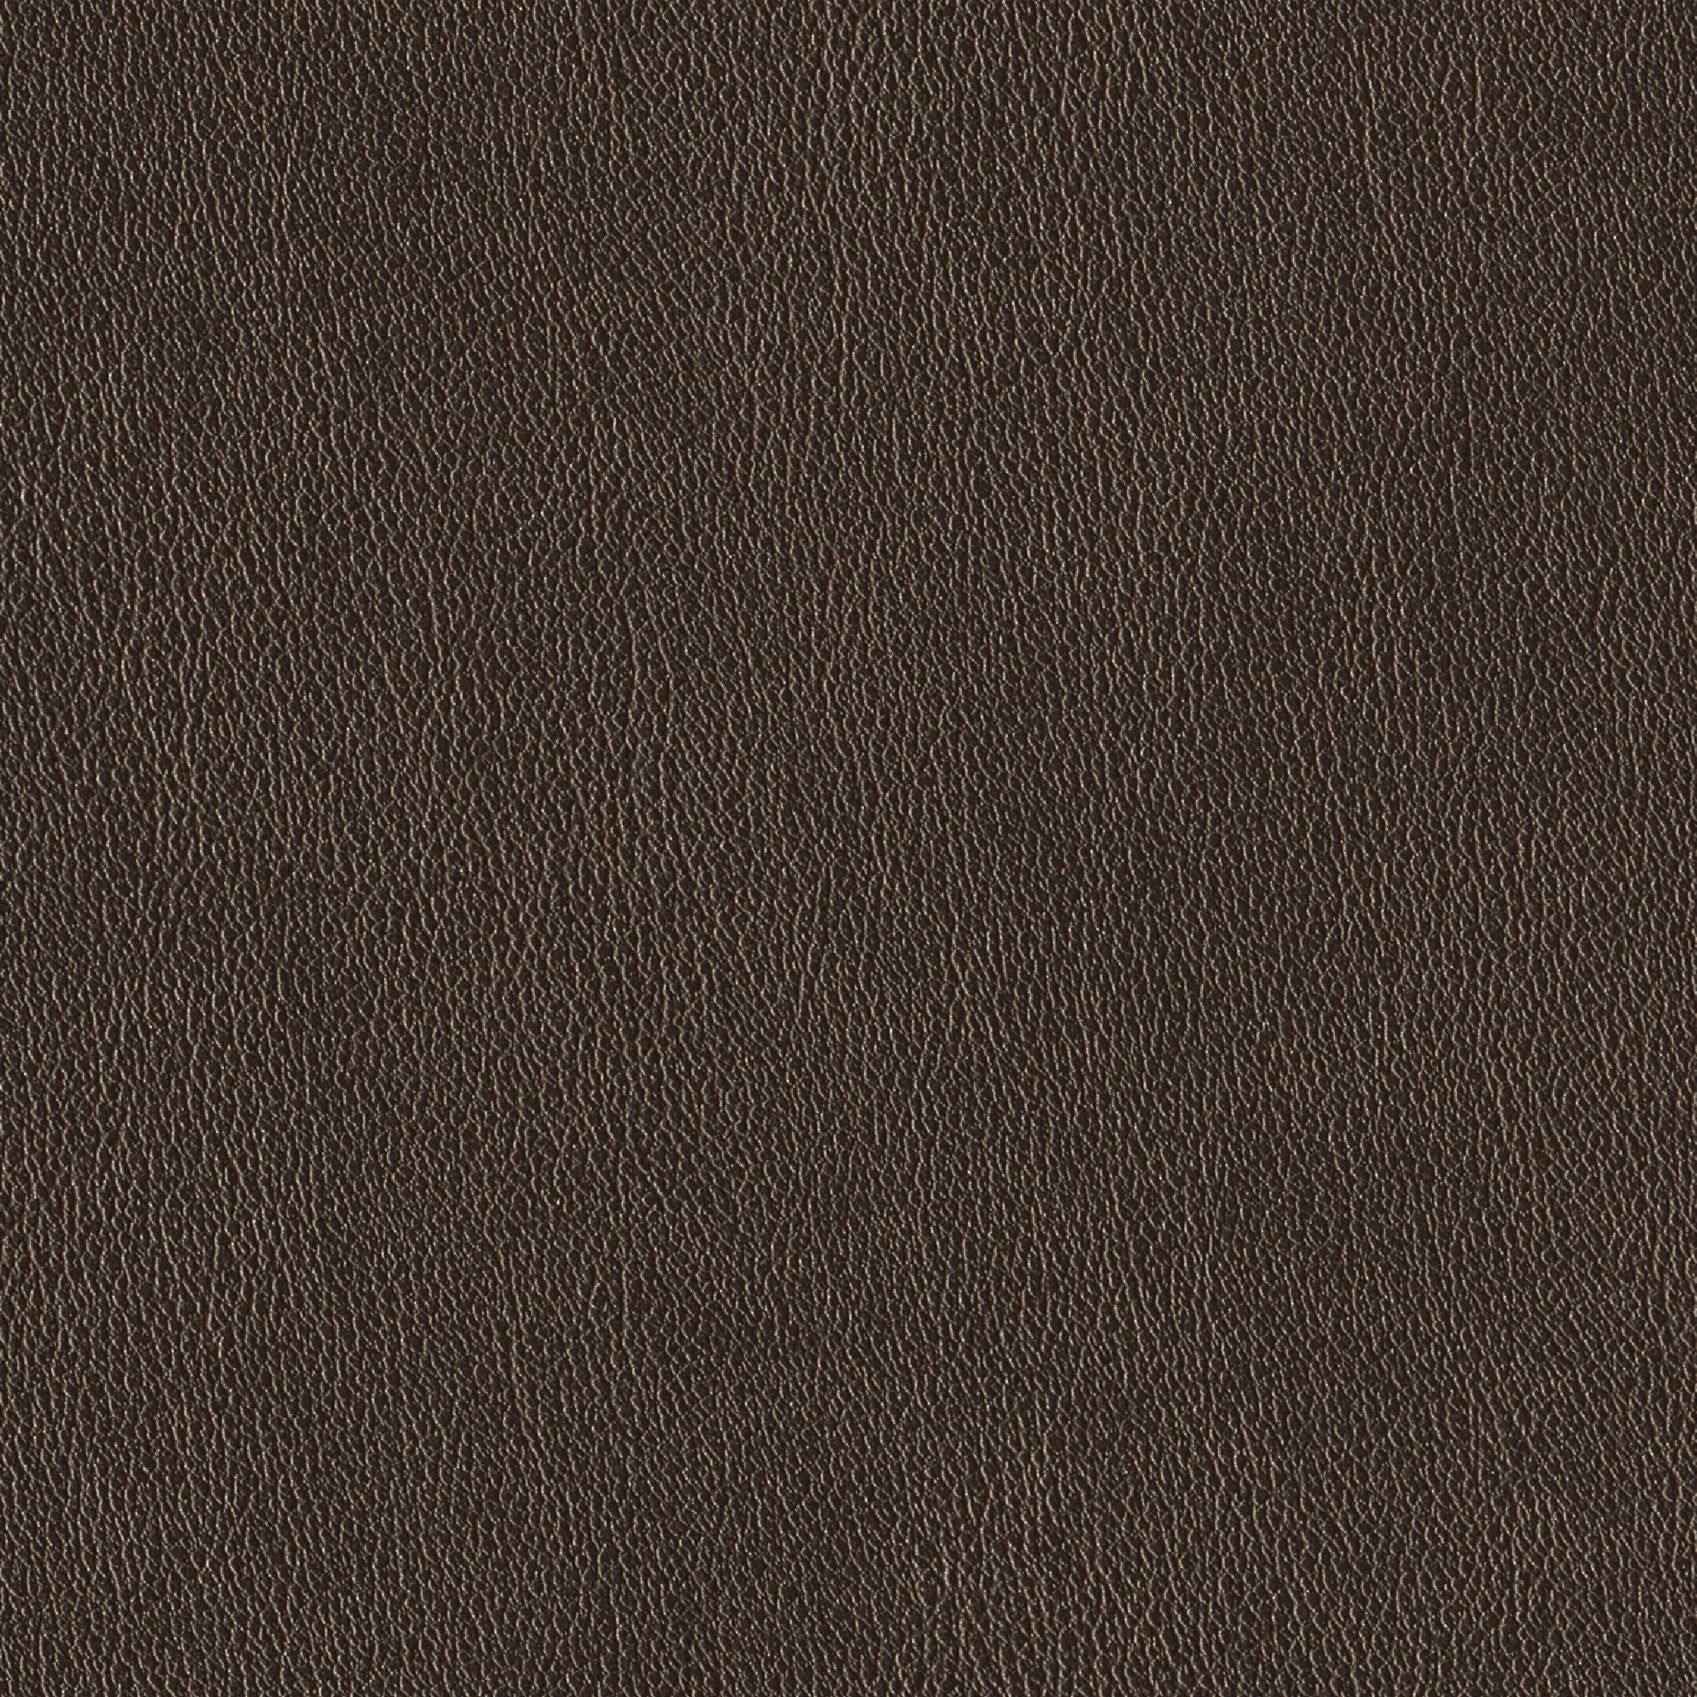 Andriali-Contract-Vinyl_Upholstery-Design-WesternFR5-Color-345Antique-Width-140cm